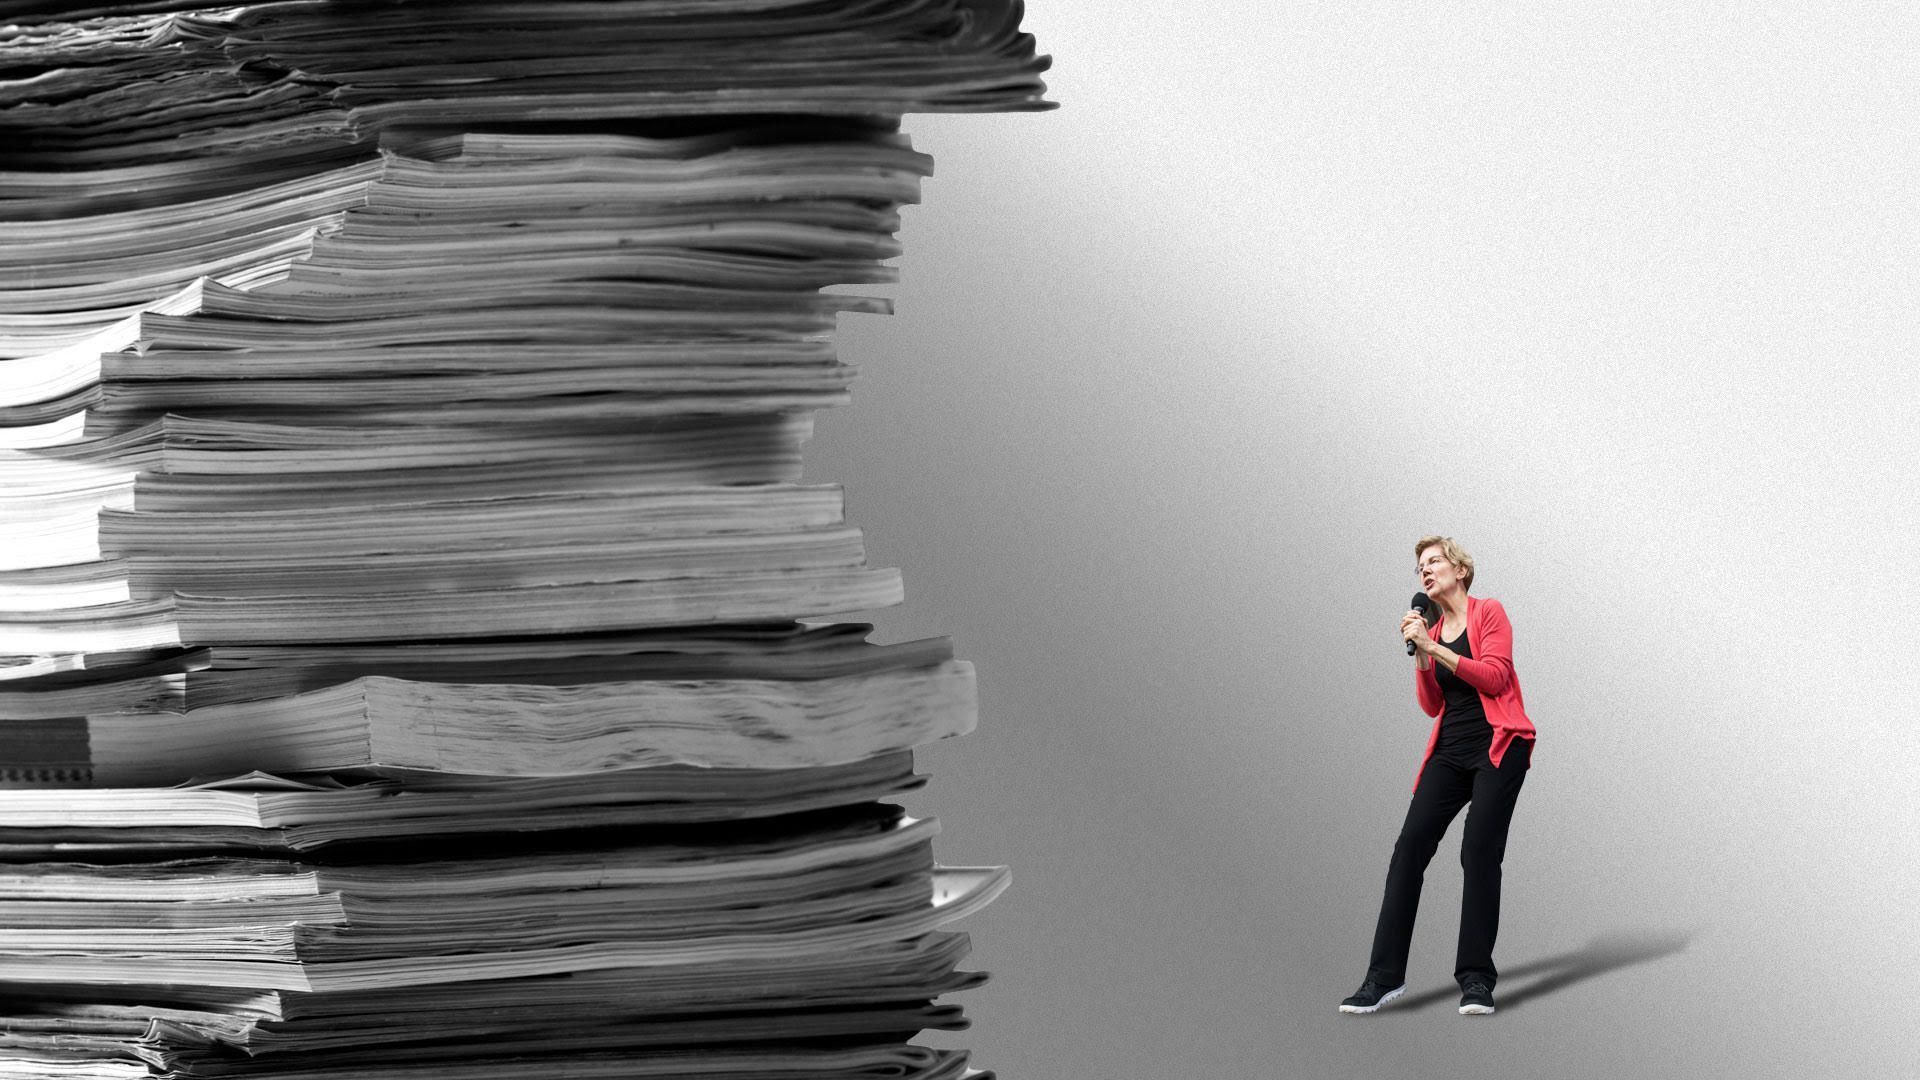 Illustration of a stack of papers towering over 2020 candidate Elizabeth Warren